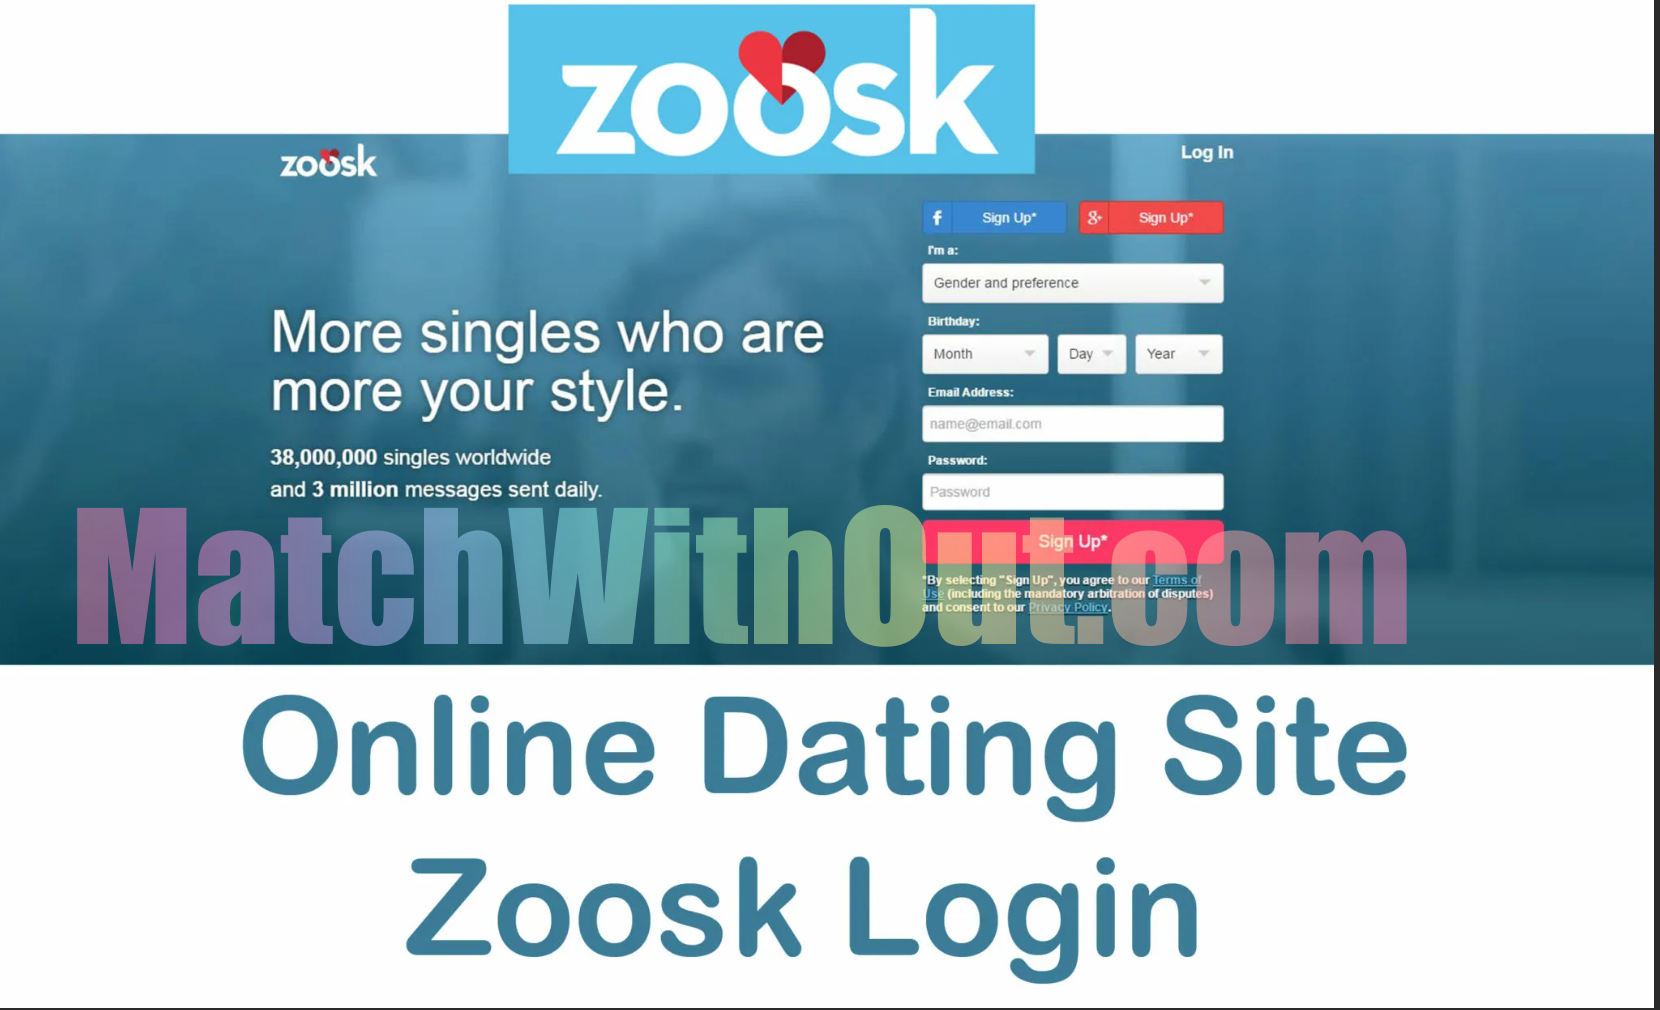 Search Zoosk Without Logging In, Search Zoosk Without Joining / Registering